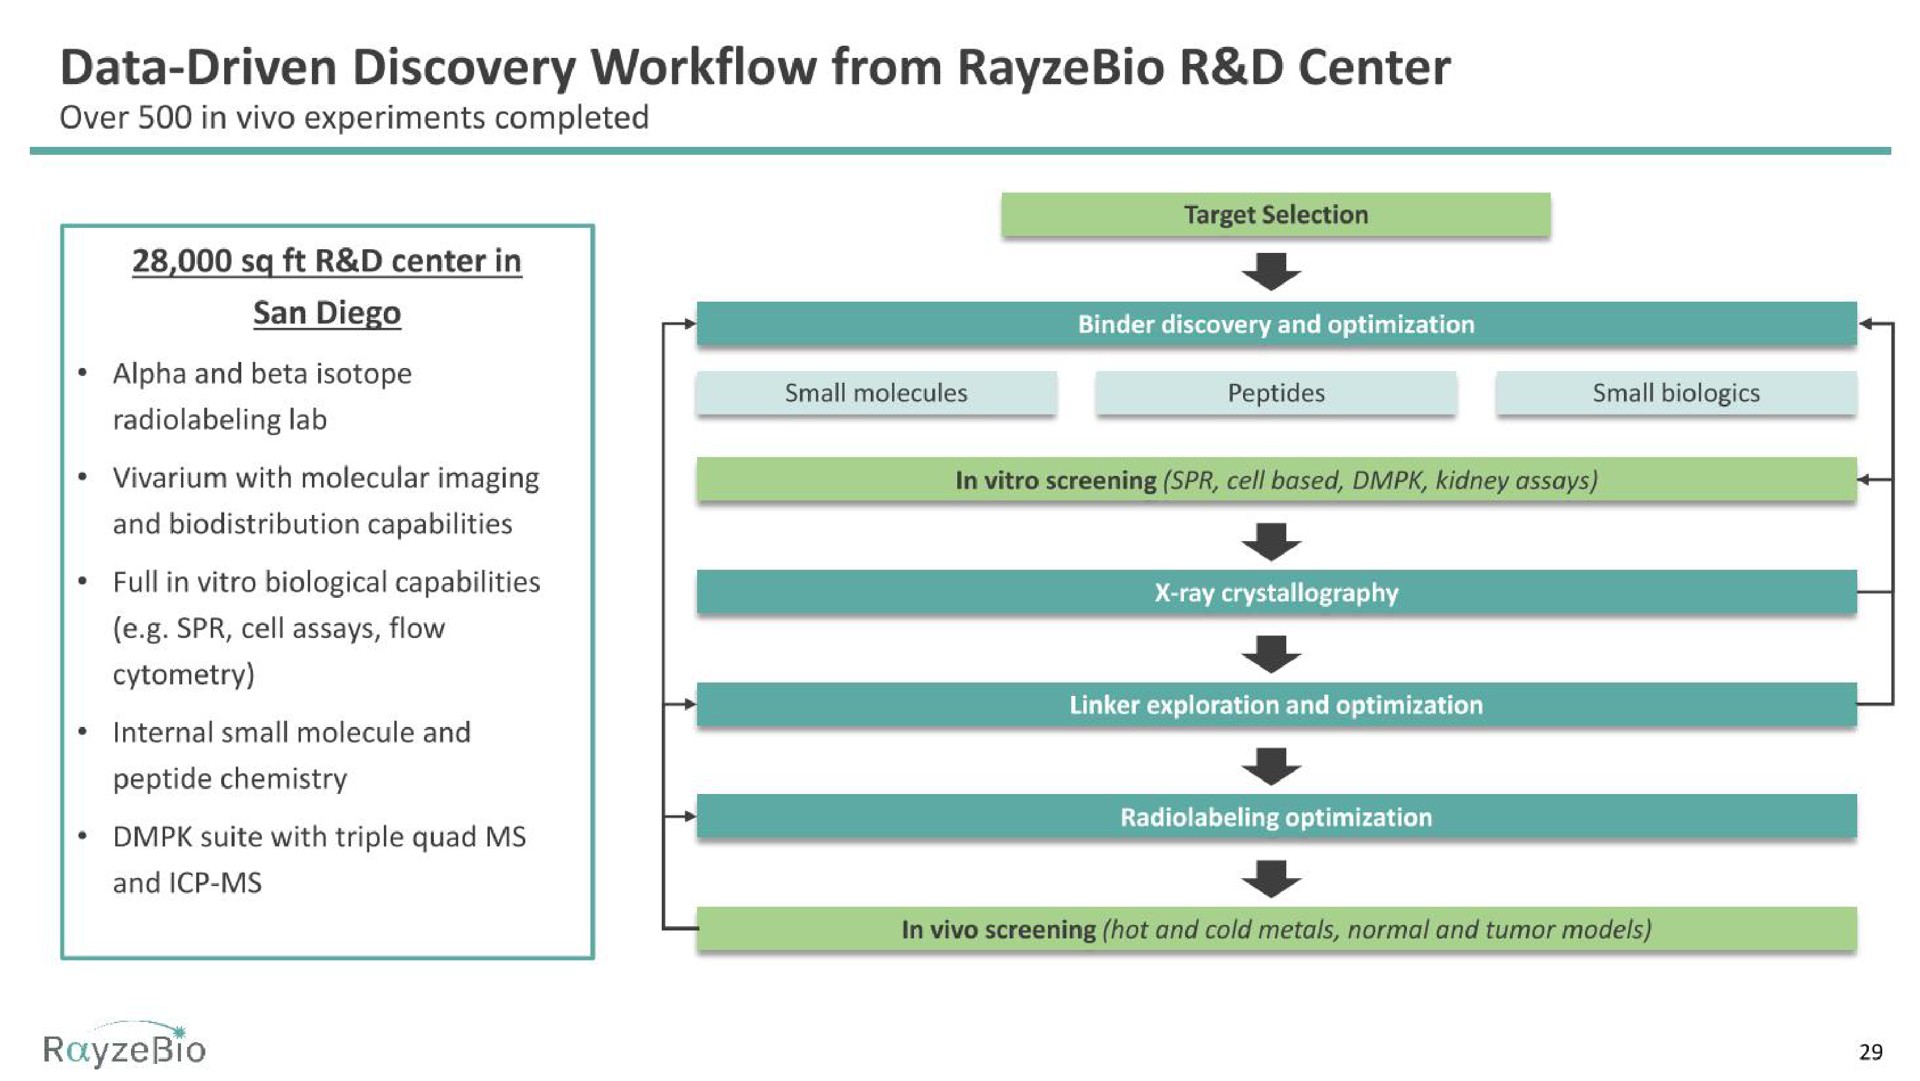 data driven discovery from center | RayzeBio